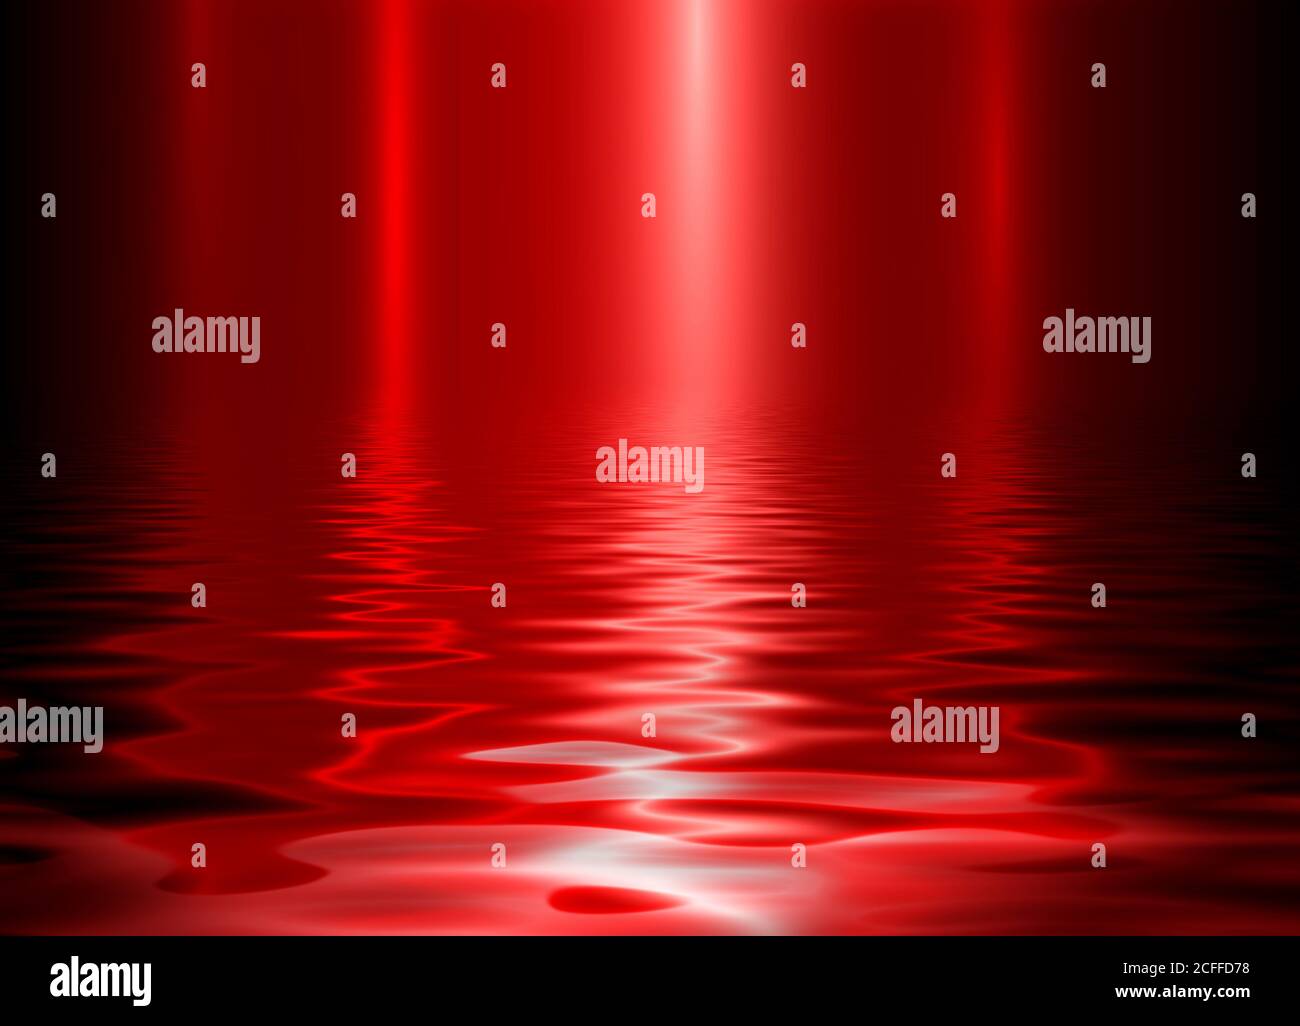 Metal background, polished metallic red texture, vector illustration Stock Photo